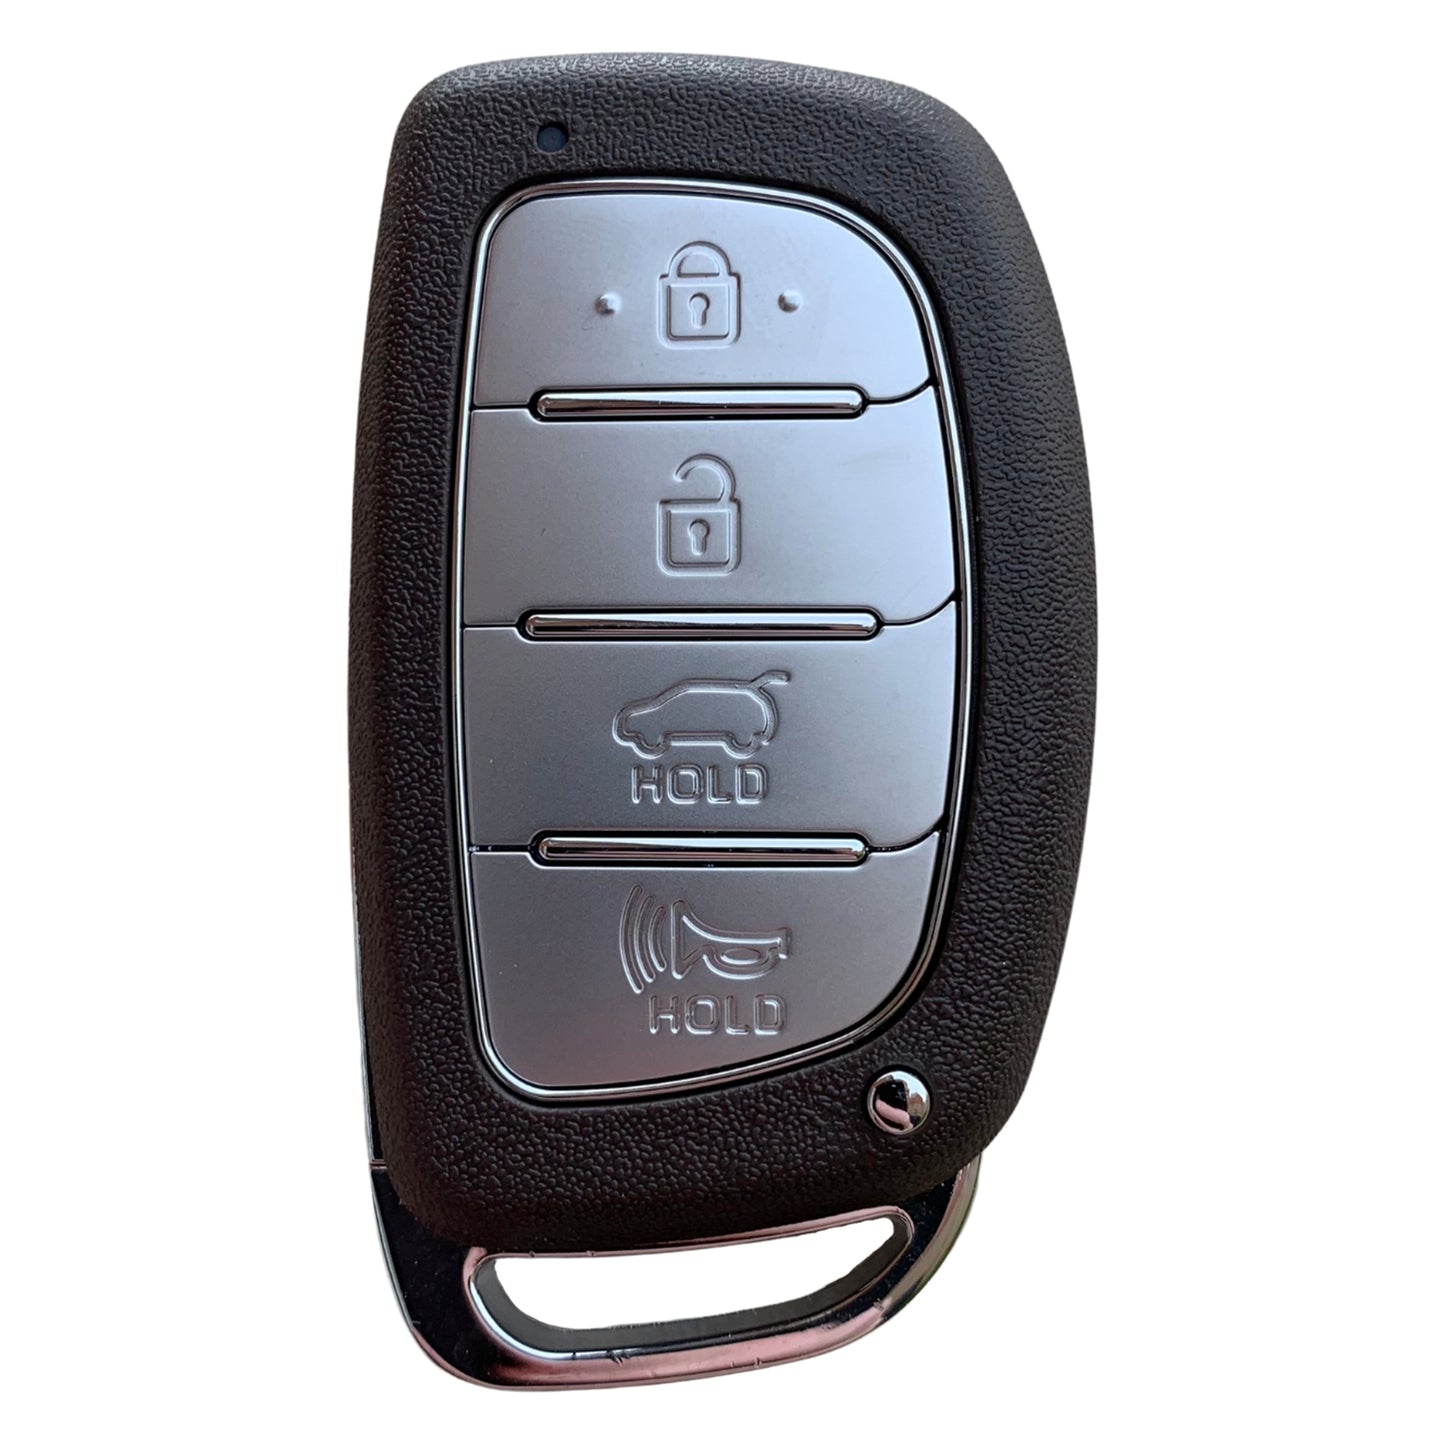 Aftermarket Smart Remote For Hyundai Tucson (95440-2S600)